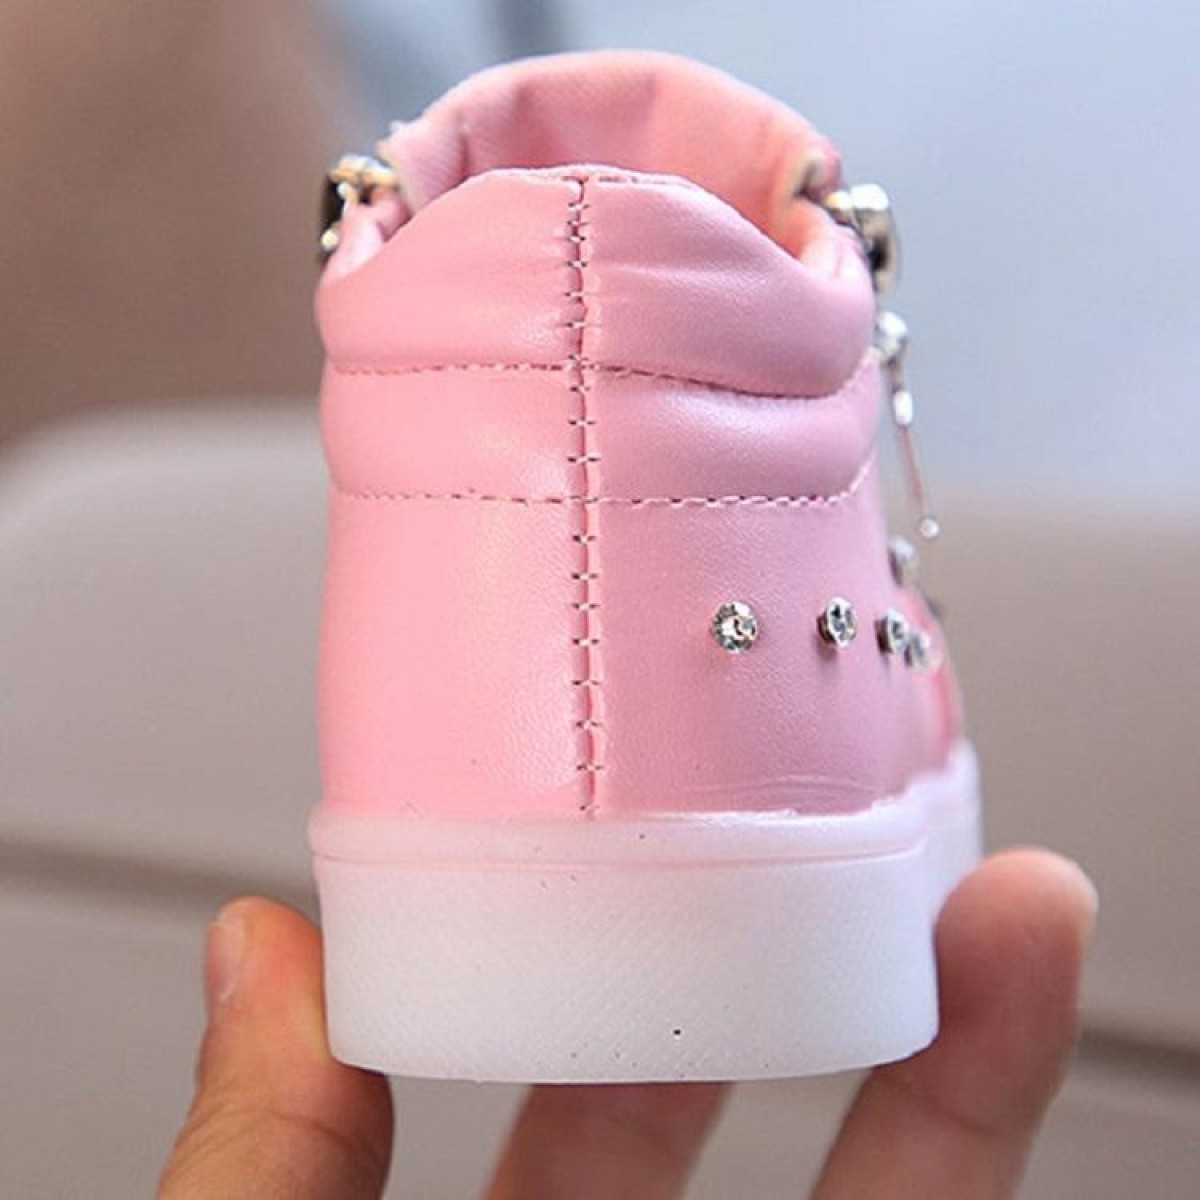 Kids Shoes Baby Infant Girls Eyelash Crystal Bowknot LED Luminous Boots Shoes Sneakers, Size:26(Pink)